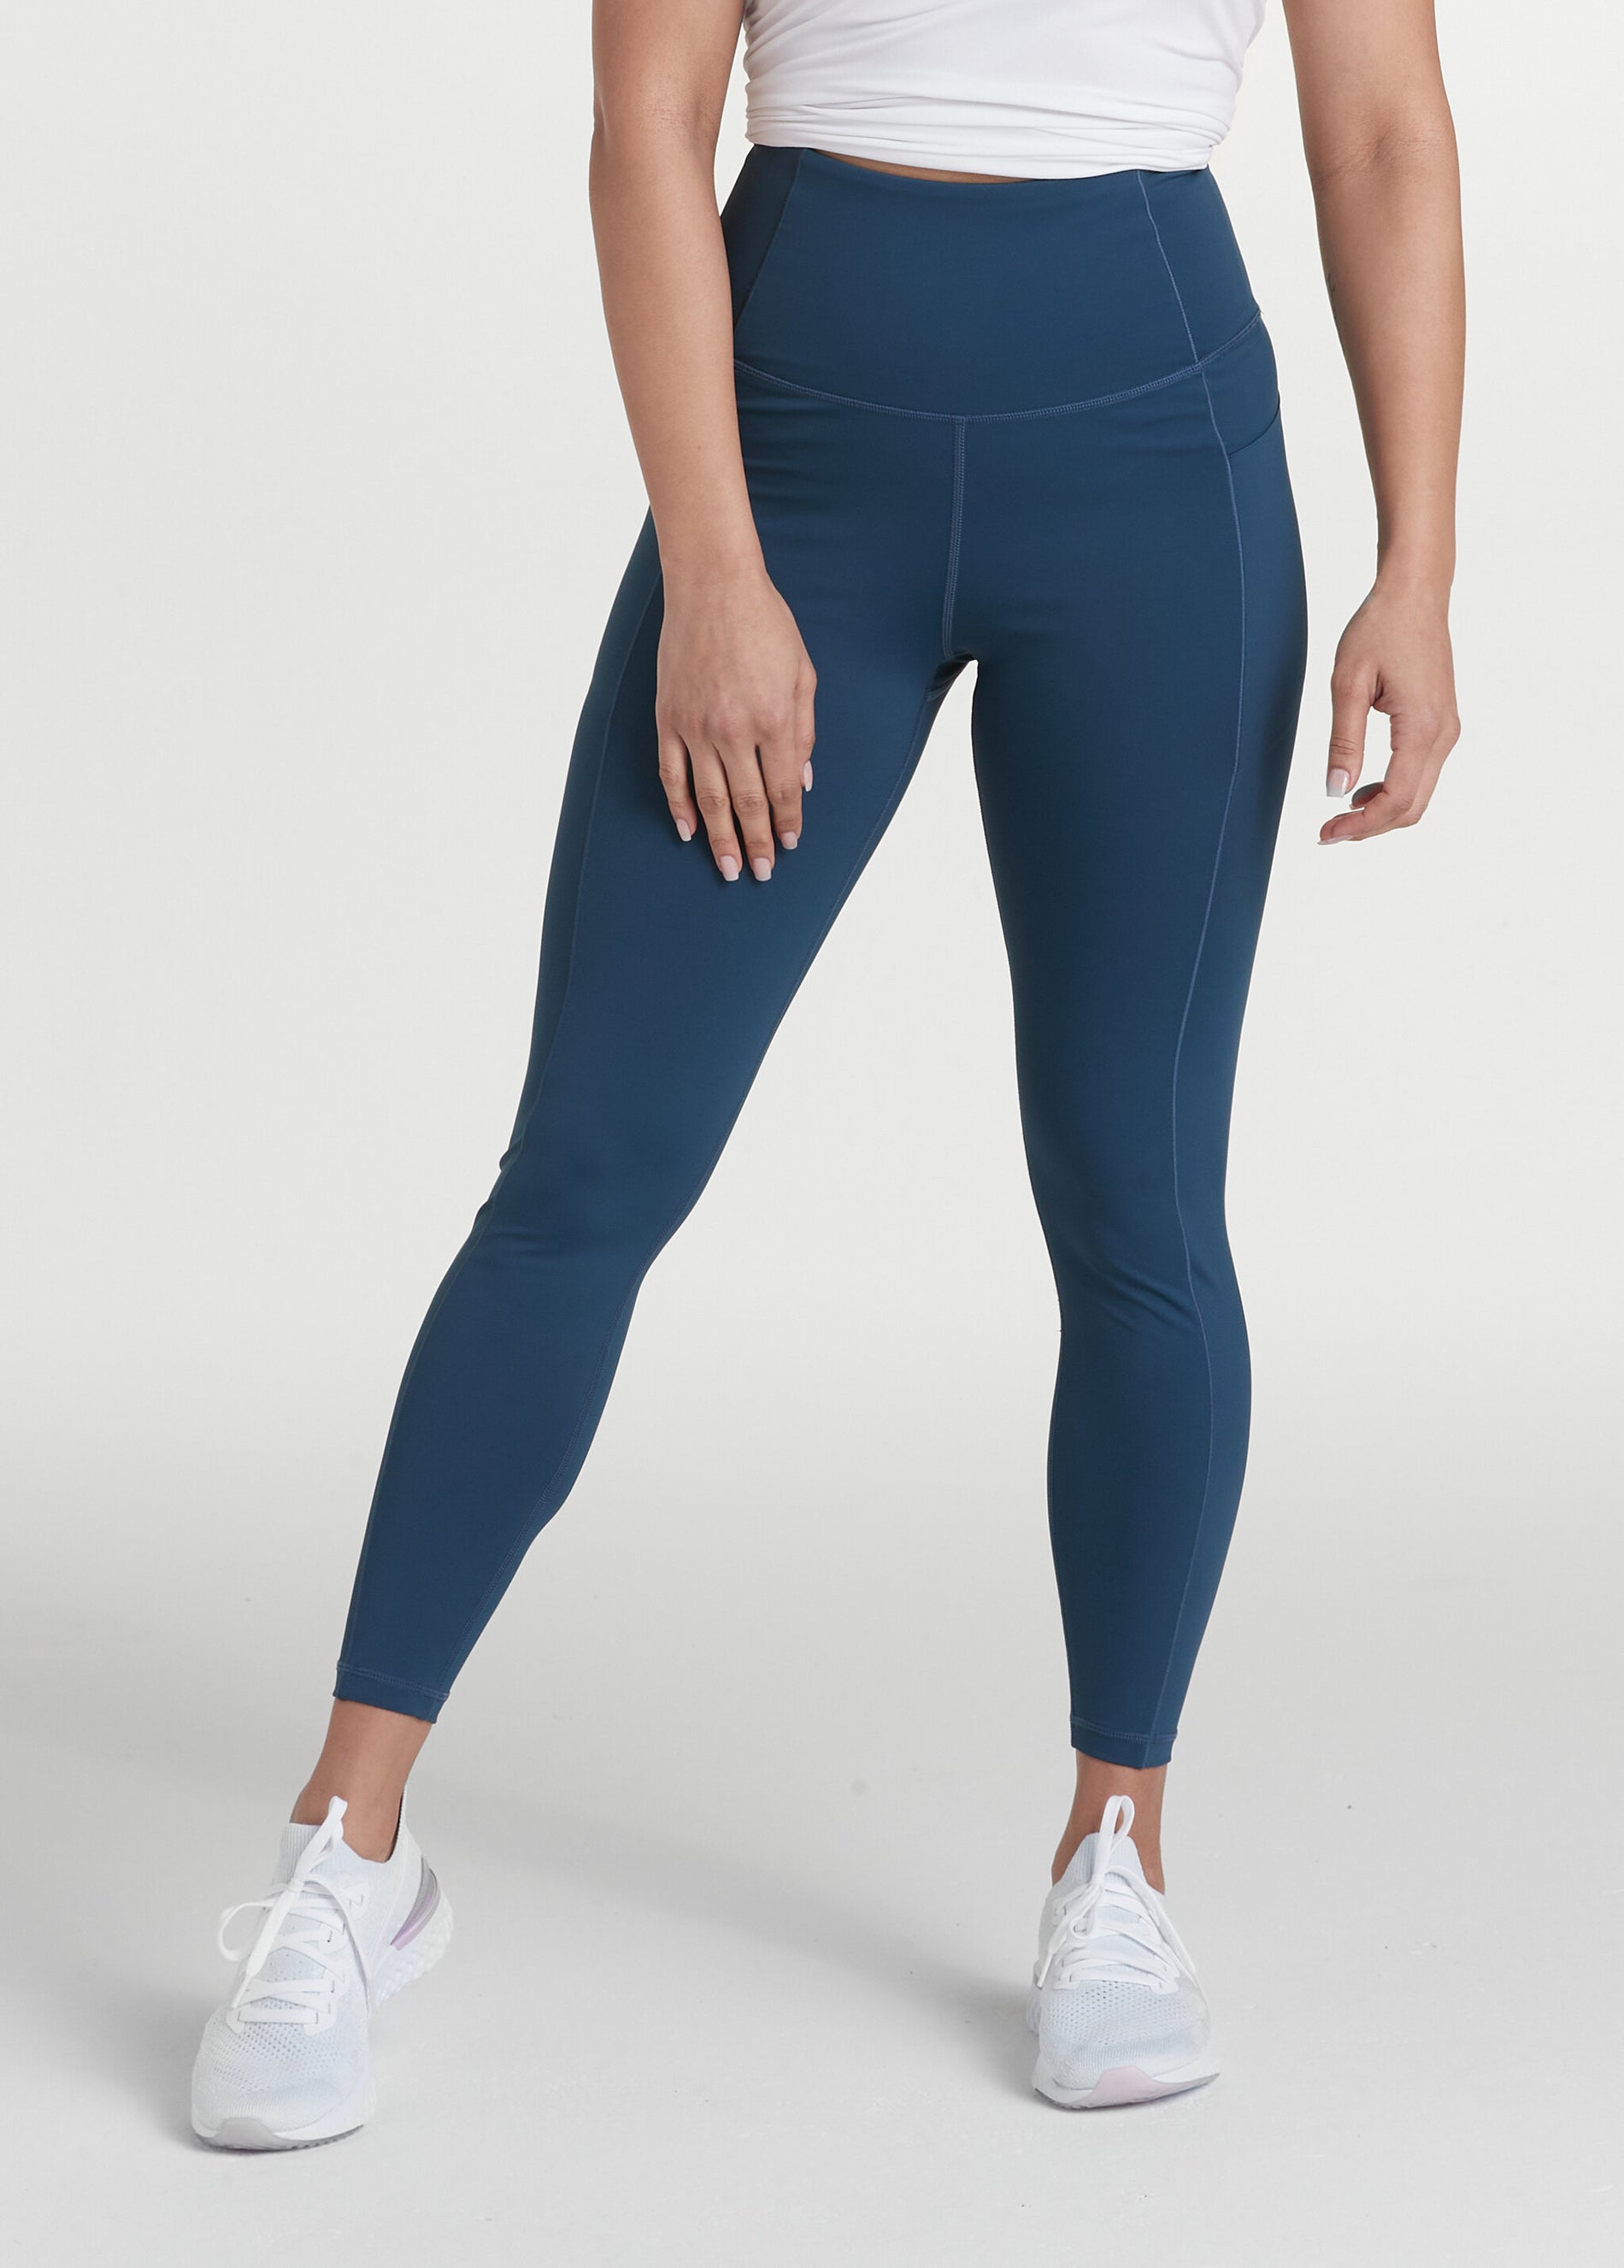 French Laundry leggings - $27 (40% Off Retail) - From Lainey